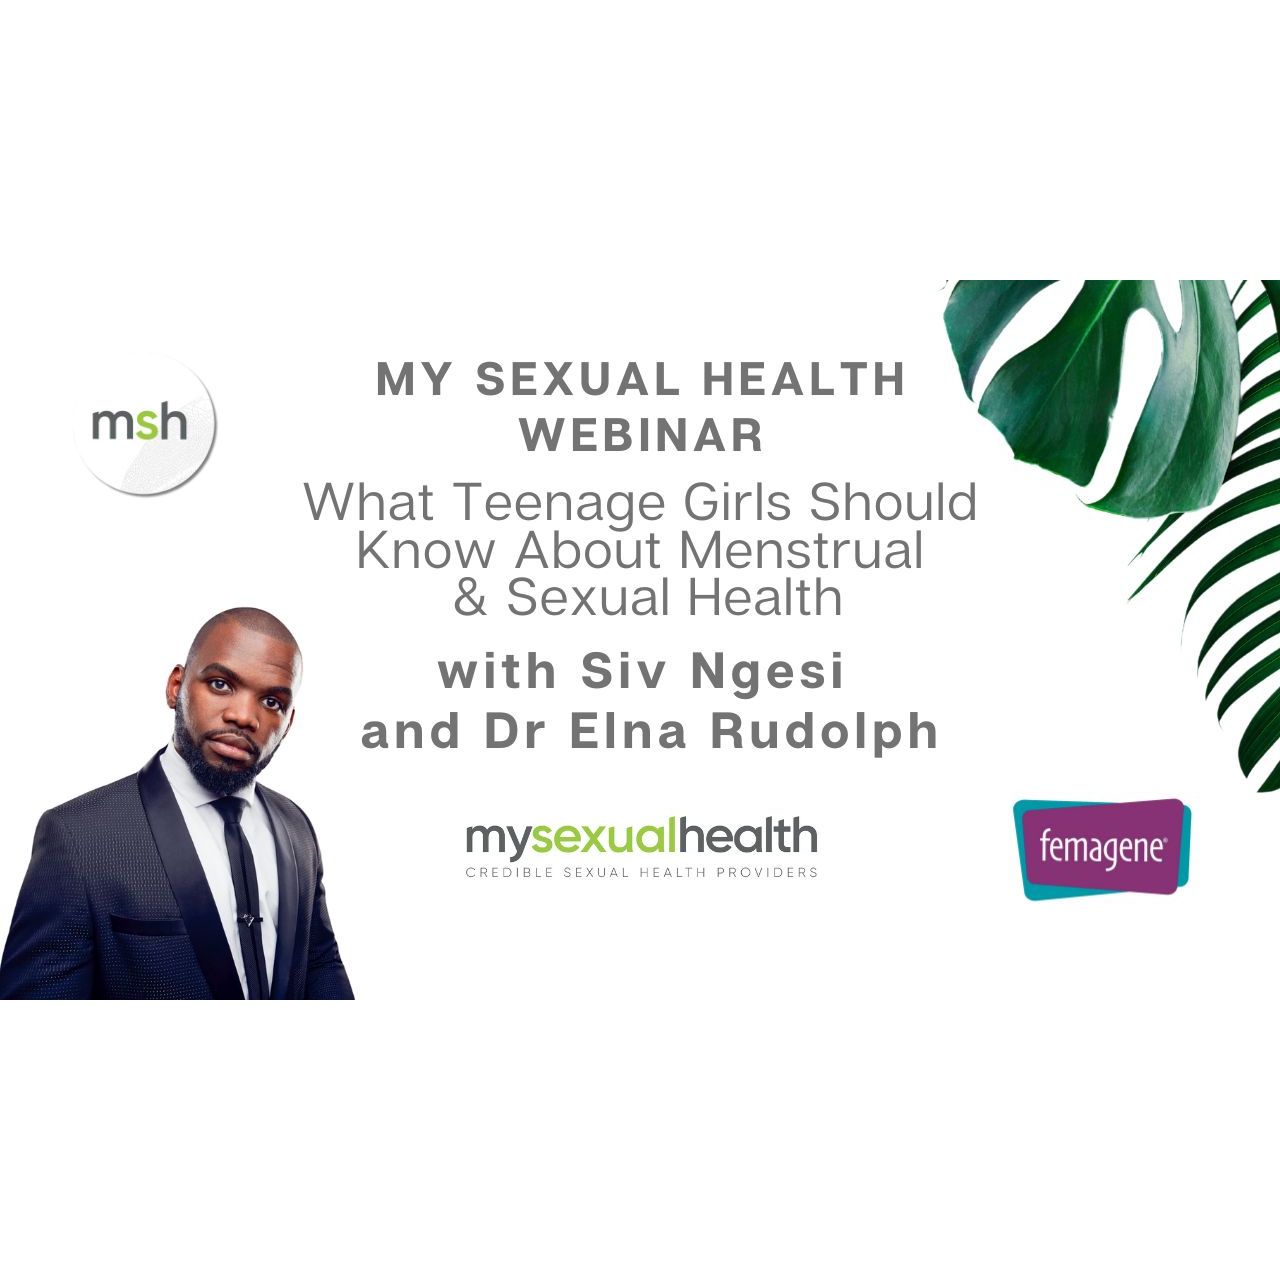 My Sexual Health Webinar: What Teenage Girls Should Know About Menstrual  & Sexual Health with Siv Ngesi and Dr Elna Rudolph sponsored by Femagene